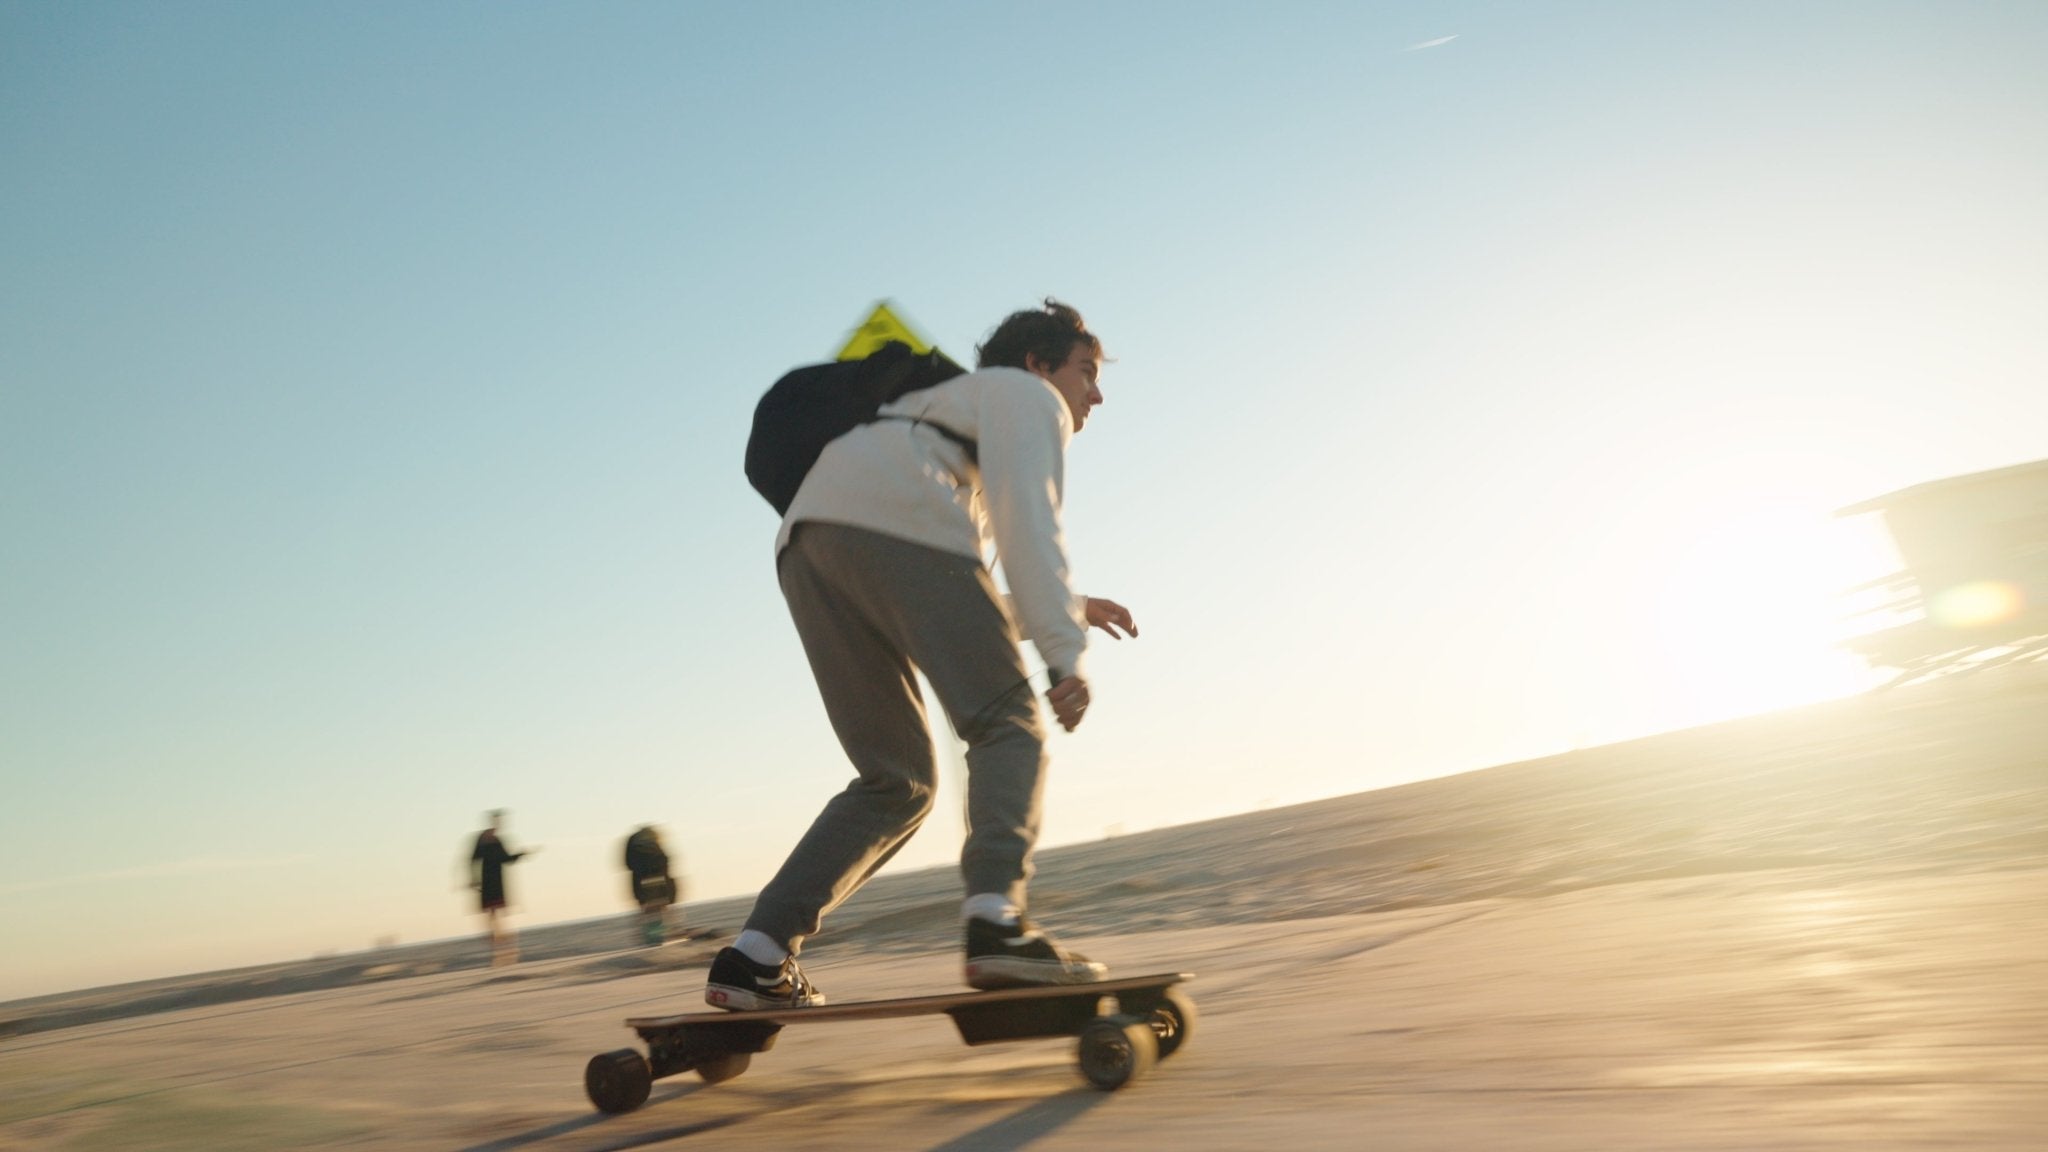 Top 10 Surprising Ways Electric Skateboard Can Change Your Life - WOWGO BOARD